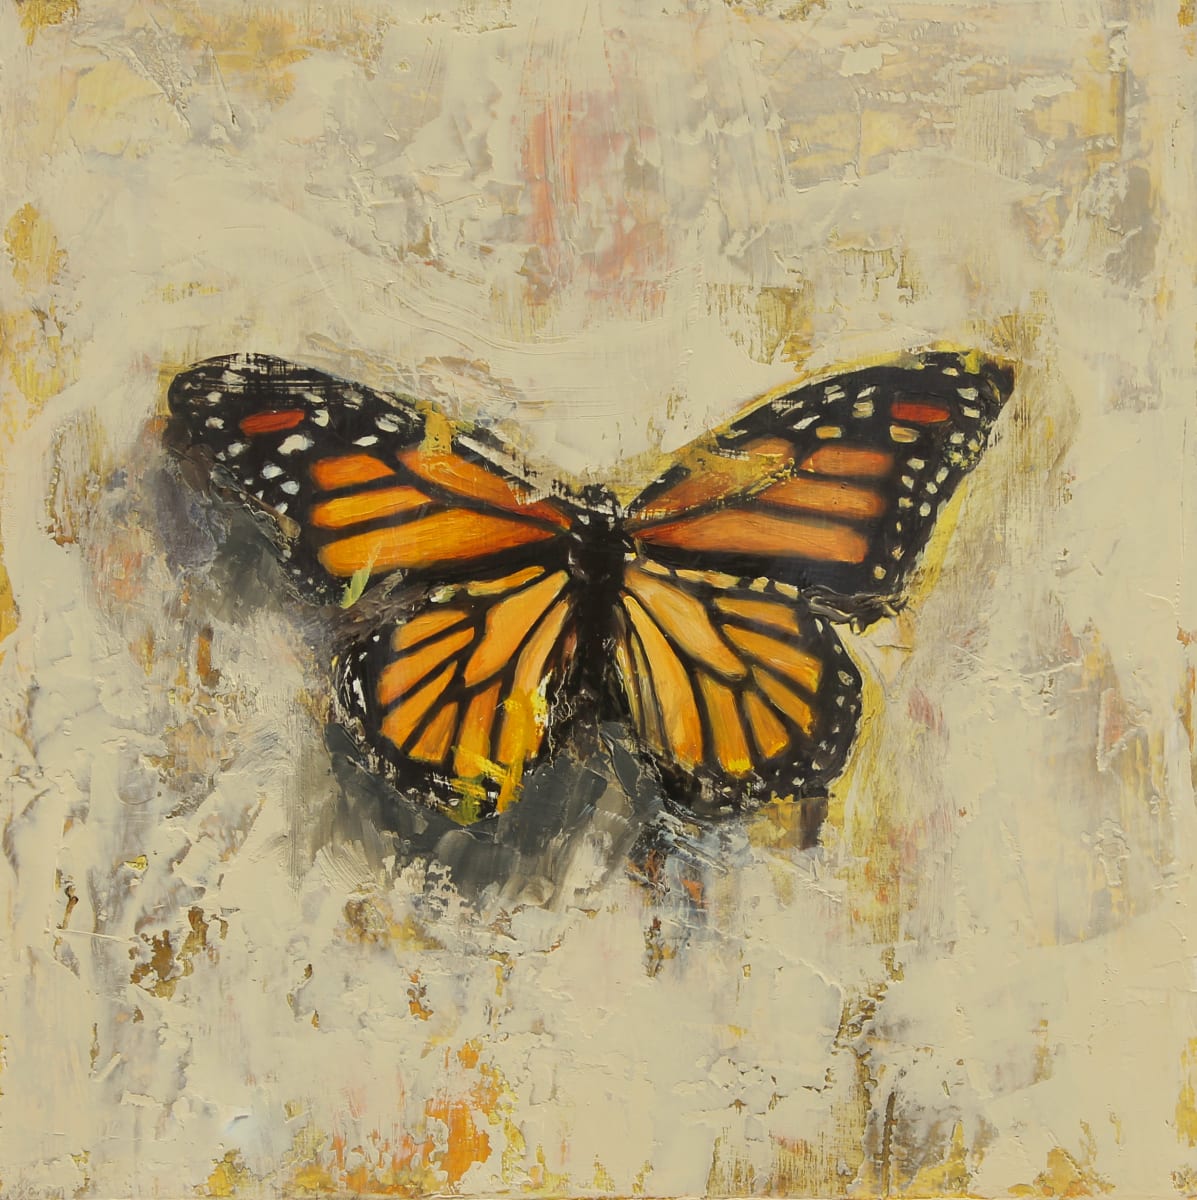 Distressed Monarch by Catherine Mills  Image: Distressed Monarch, oil on gallery wood panel, 10 x 10 inches